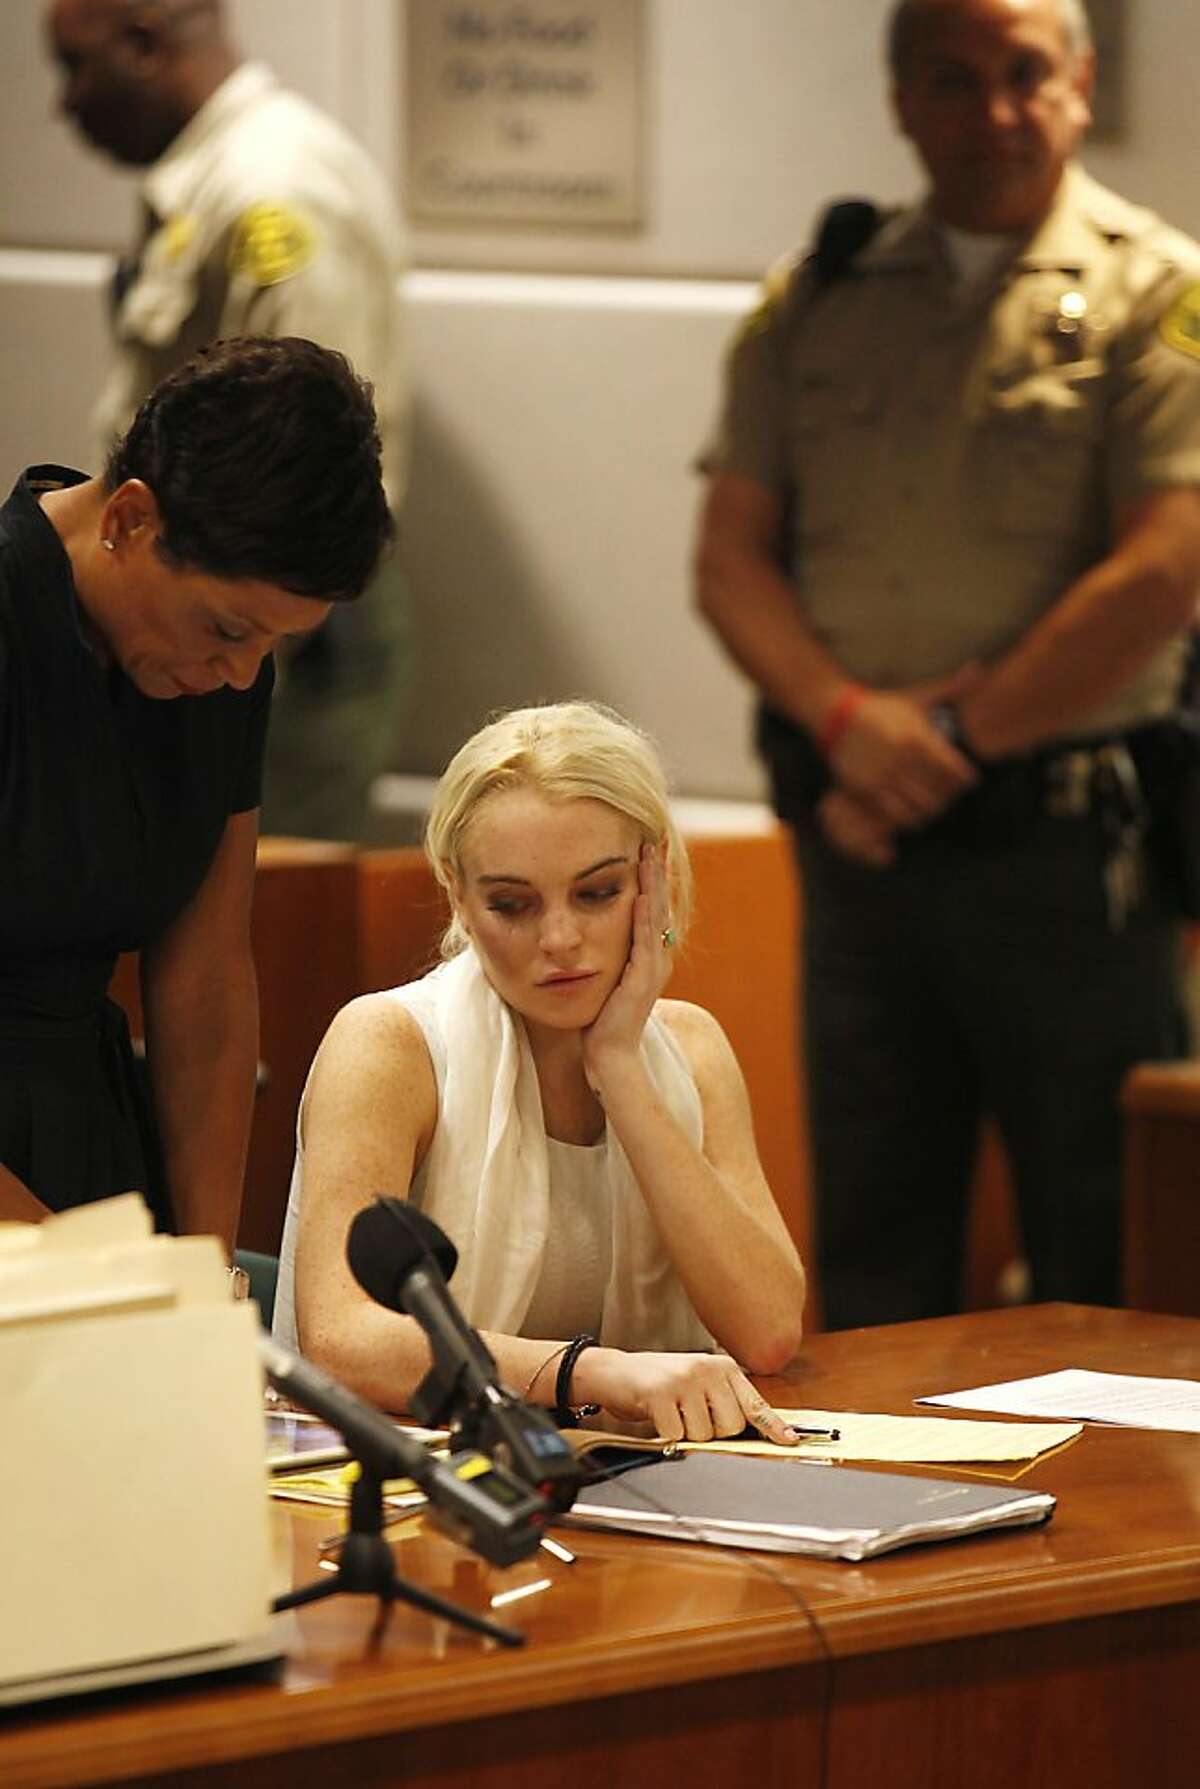 Actress Lindsay Lohan listens at her progress hearing at the Airport Branch Courthouse in Los Angeles October 19, 2011. At left is Lohan's attorney Shawn Chapman Holley. Lohan was handcuffed and taken into custody with bail set at USD $100,000 in the case of a misdemeanor count of theft involving a necklace taken from a jewelry store. AFP PHOTO / POOL / Mark Boster (Photo credit should read Mark Boster/AFP/Getty Images)